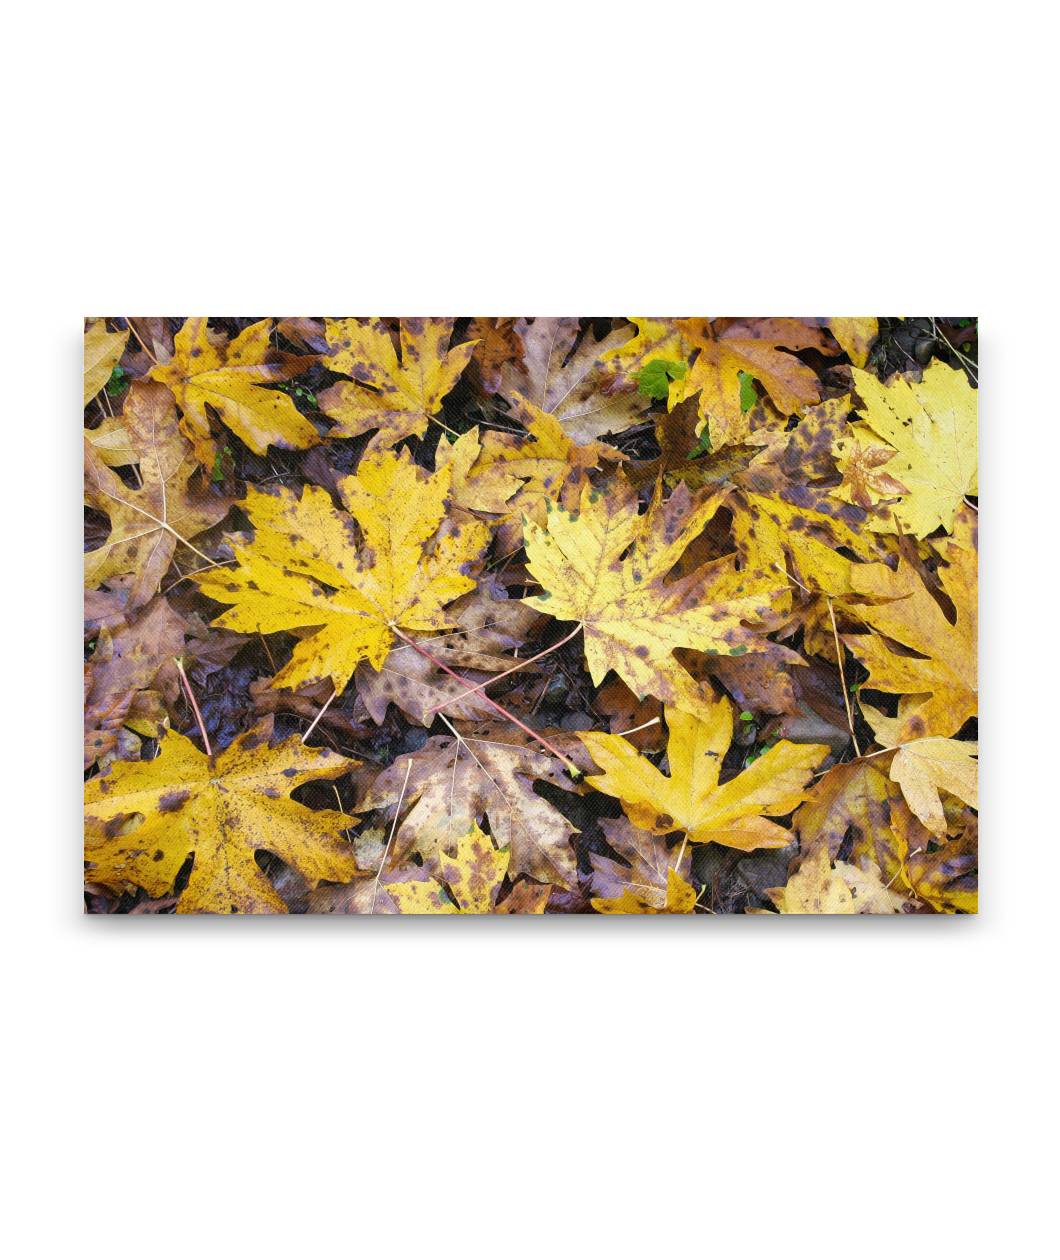 Big-Leaf Maple Fall-Colored Leaves on Ground, Willamette National Forest, Oregon